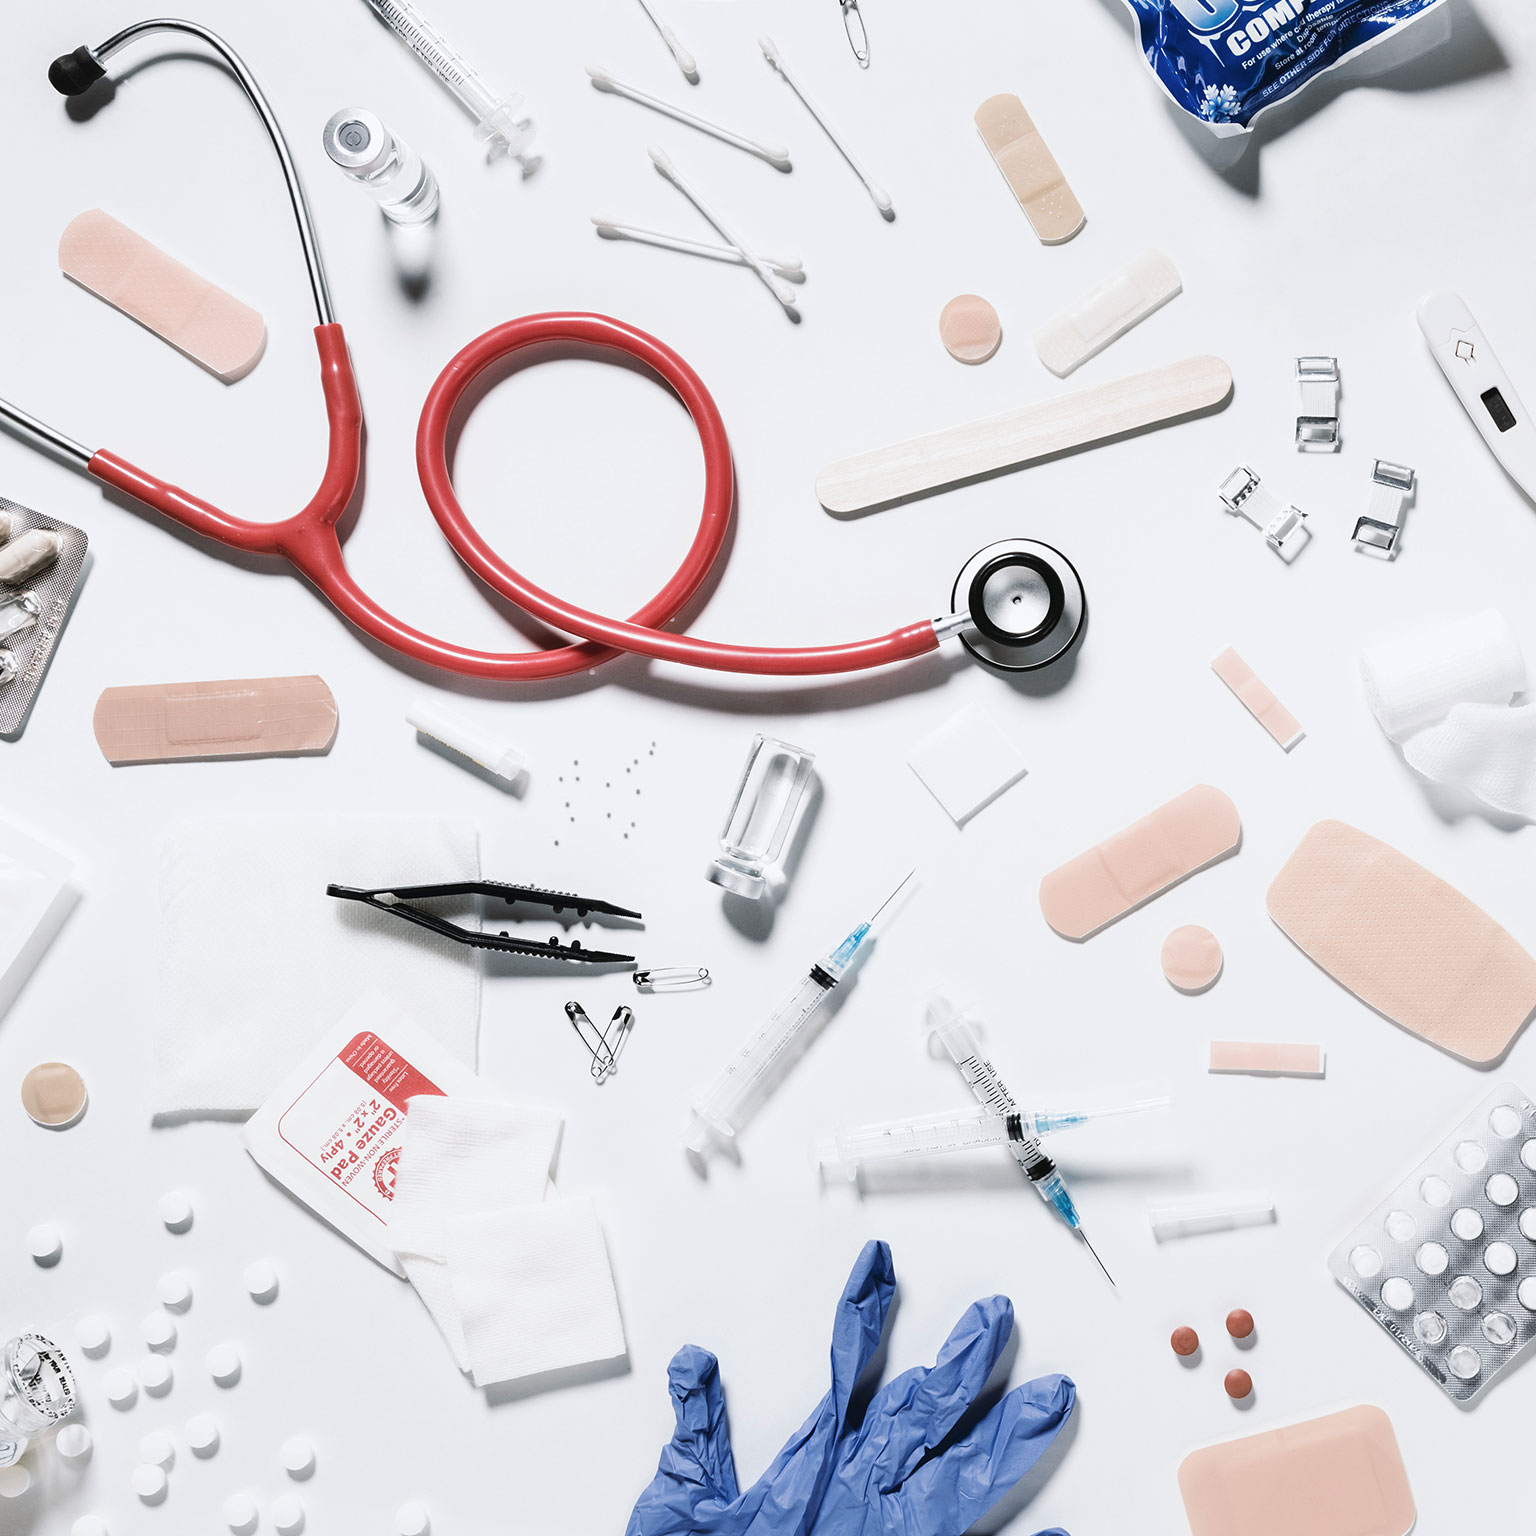 Image of various medical tools on a white table